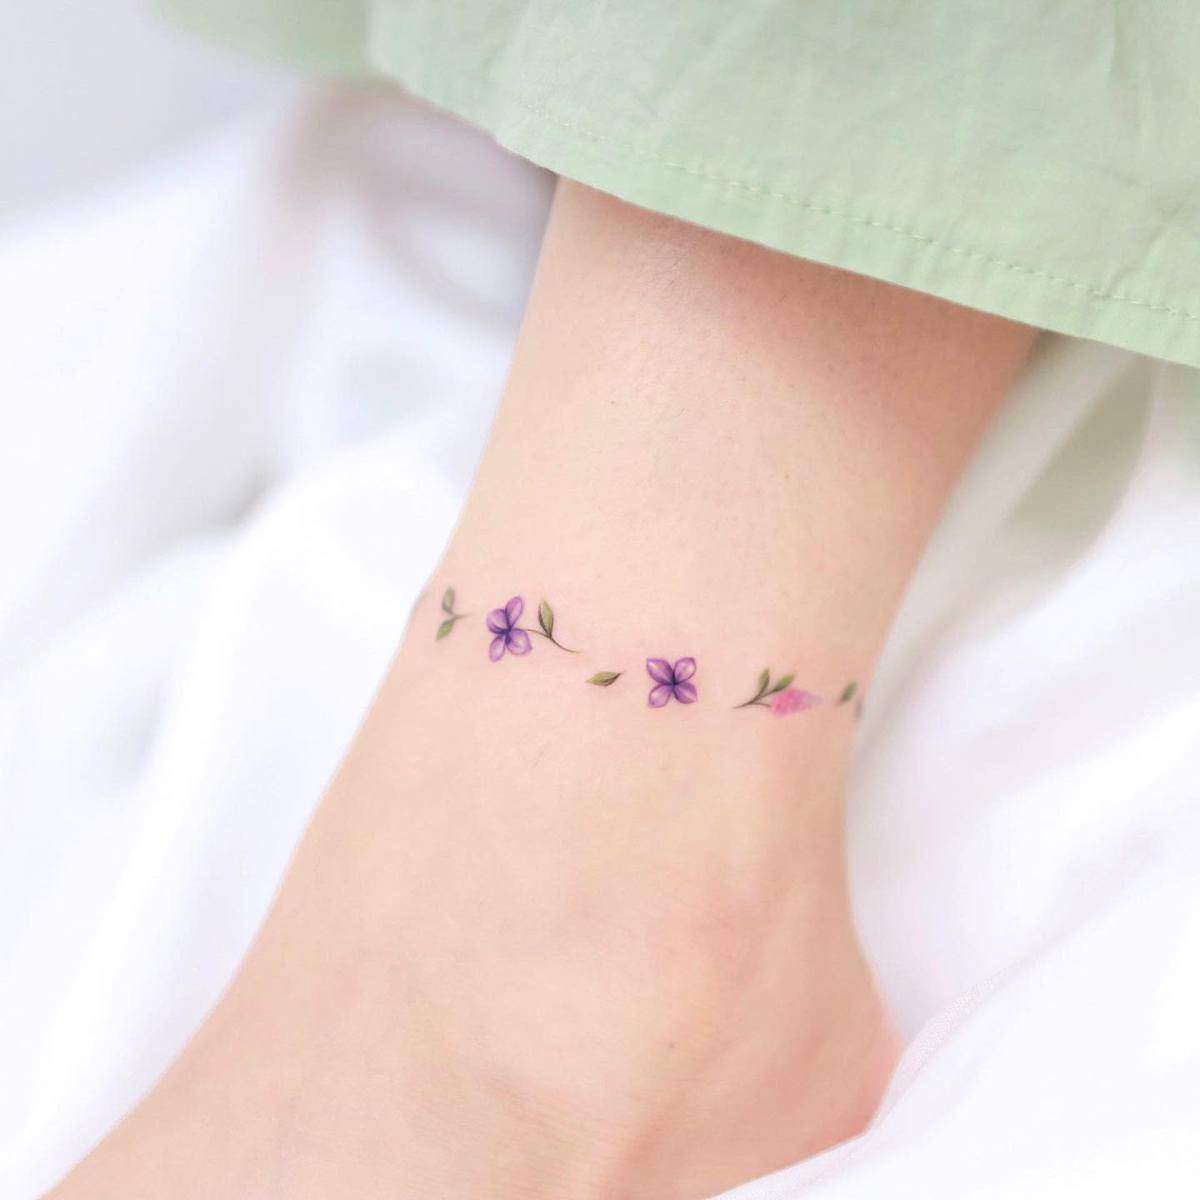 25 cool ankle tattoo designs for women that you must see  Online tattoo  magazine  IdeasTattoo